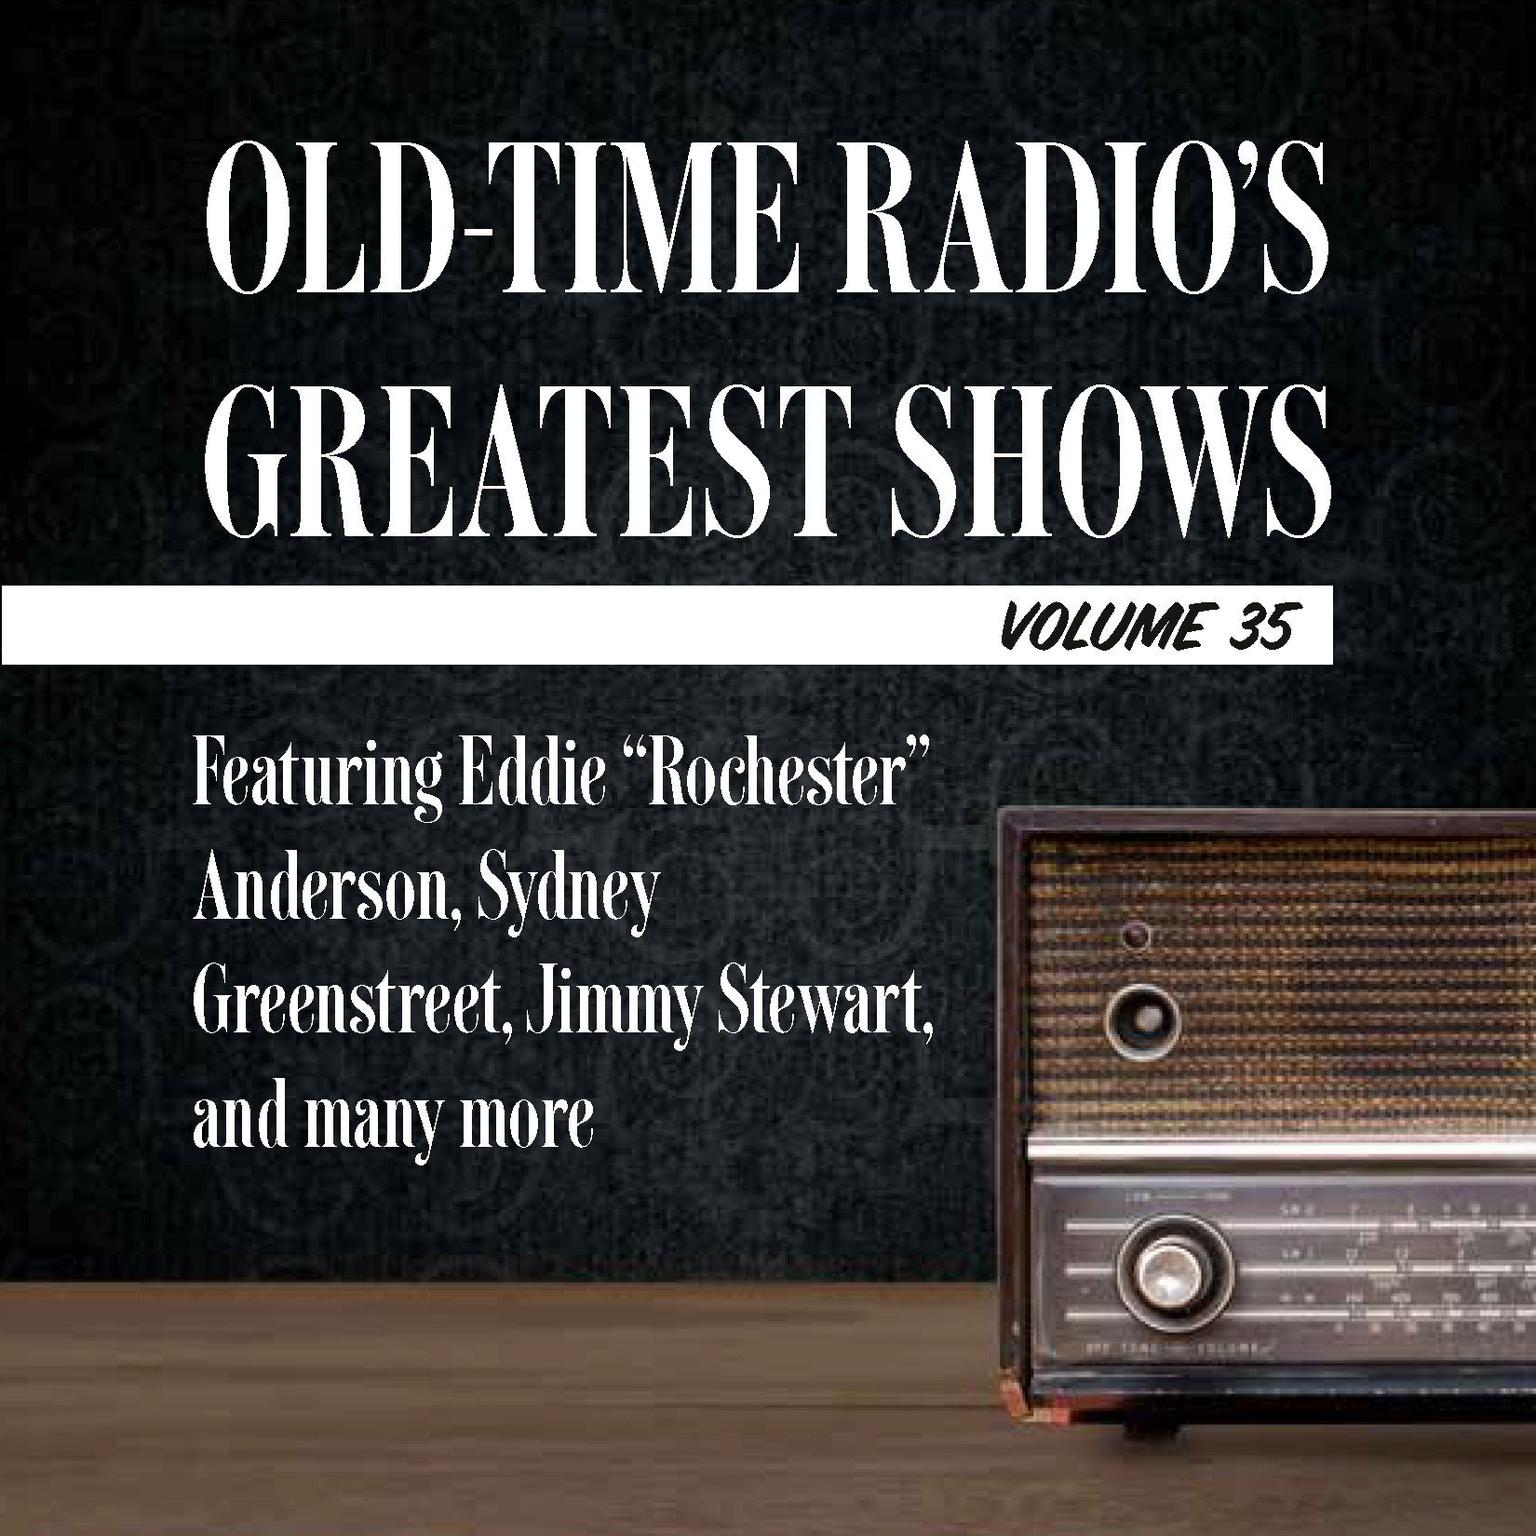 Old-Time Radios Greatest Shows, Volume 35: Featuring Eddie Rochester Anderson, Sydney Greenstreet, Jimmy Stewart, and many more Audiobook, by Carl Amari